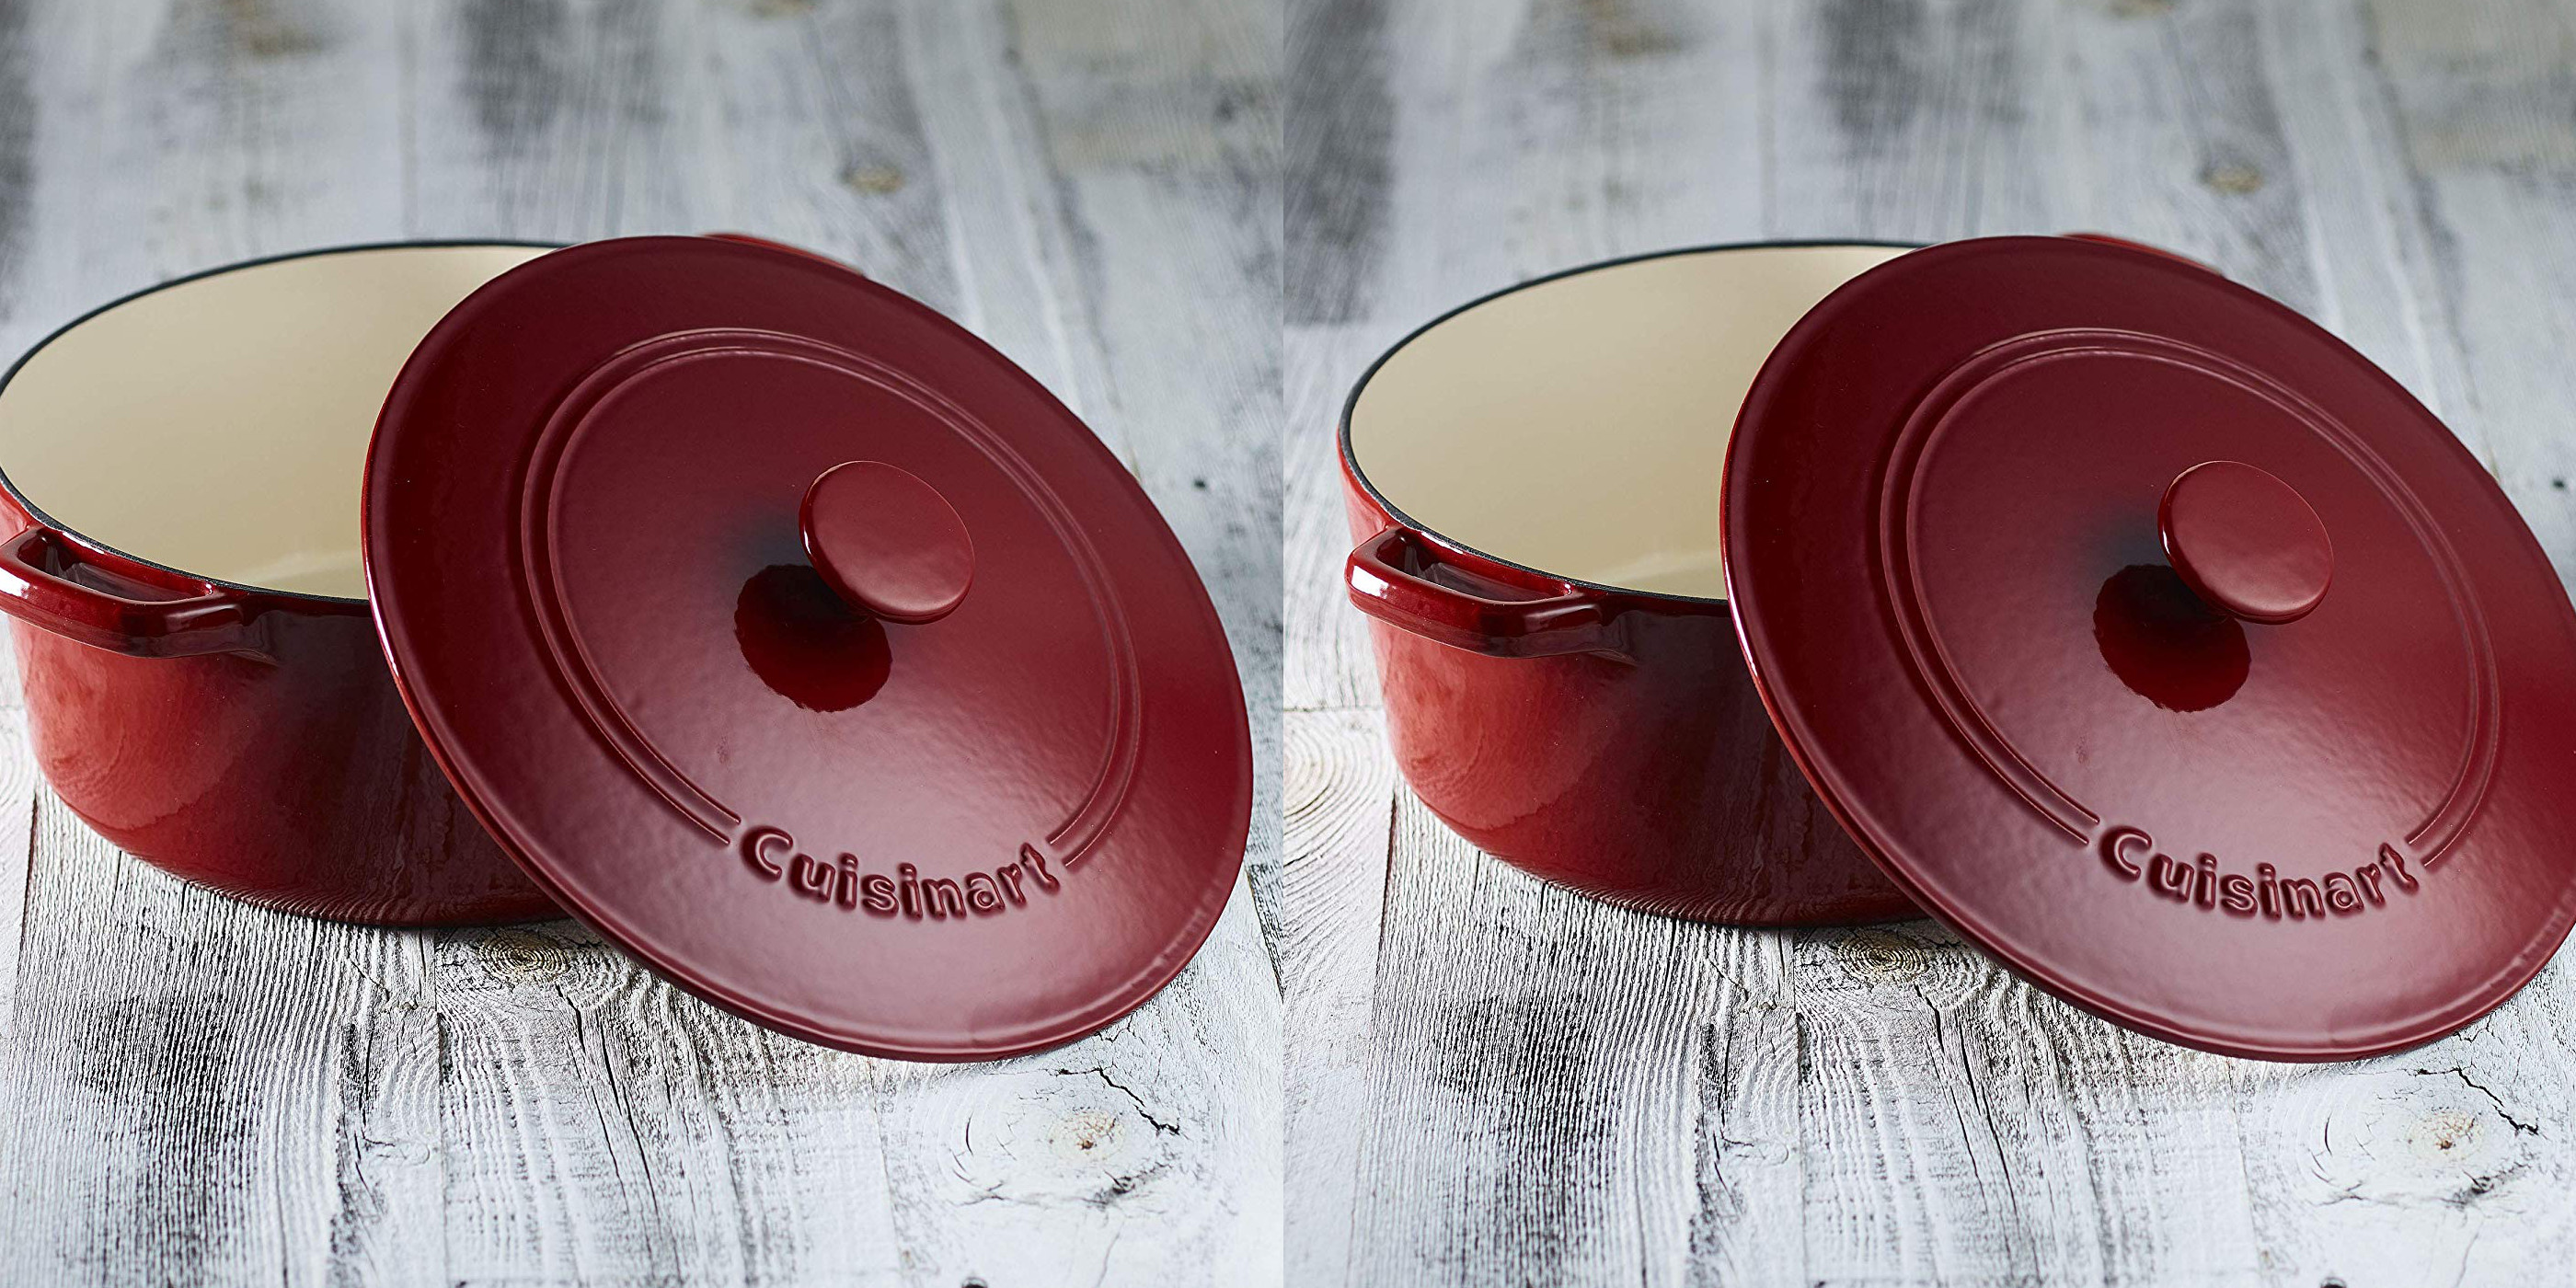 https://9to5toys.com/wp-content/uploads/sites/5/2019/02/Cuisinart-Chefs-Classic-Enameled-Cast-Iron-7-Quart-Round-Covered-Casserole.jpg